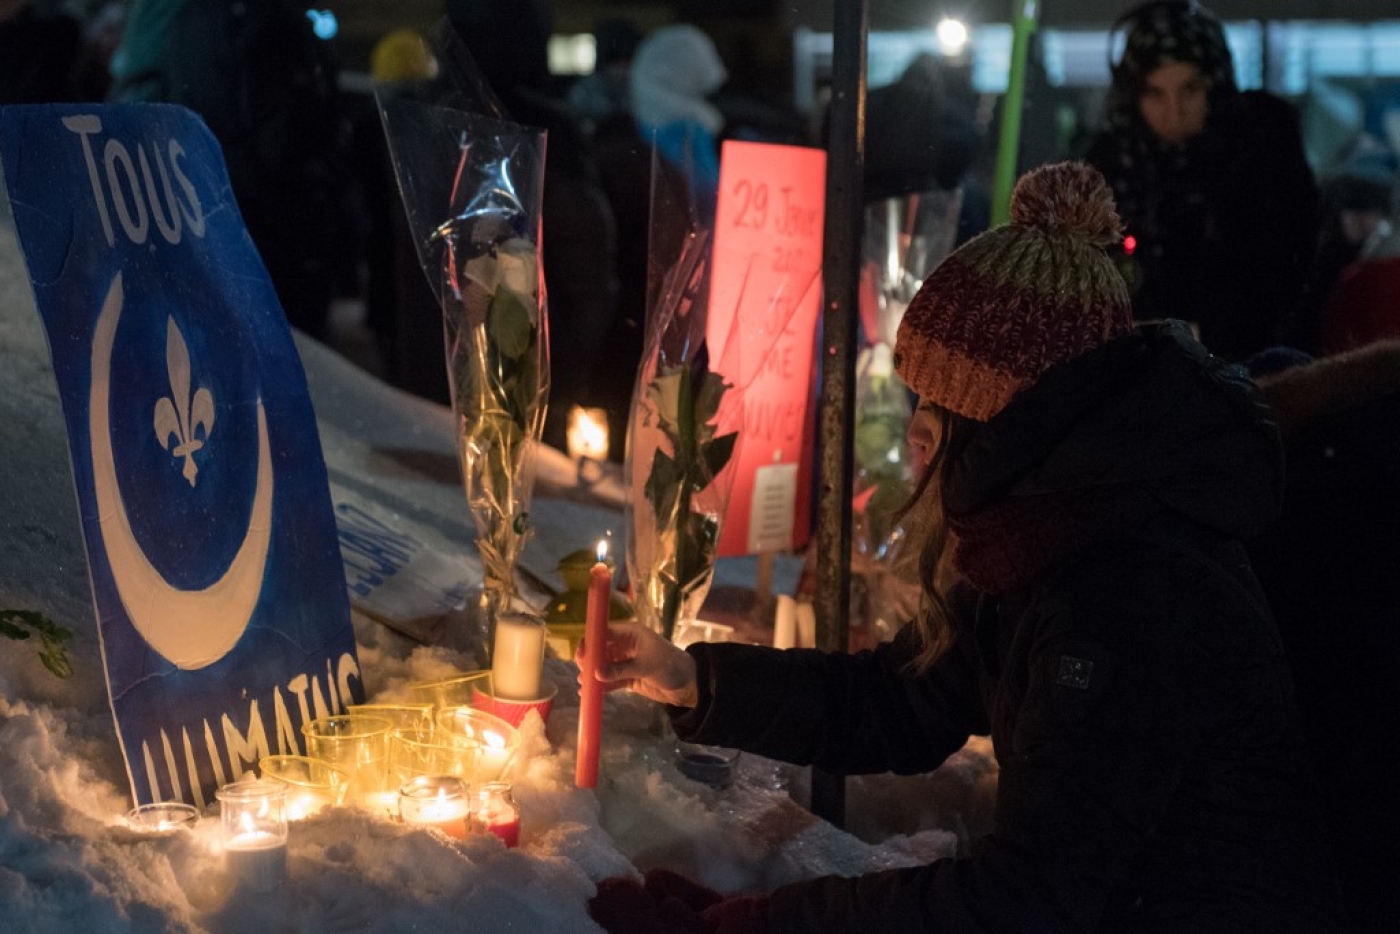 The Quebec mosque shooting sent shockwaves across the country.